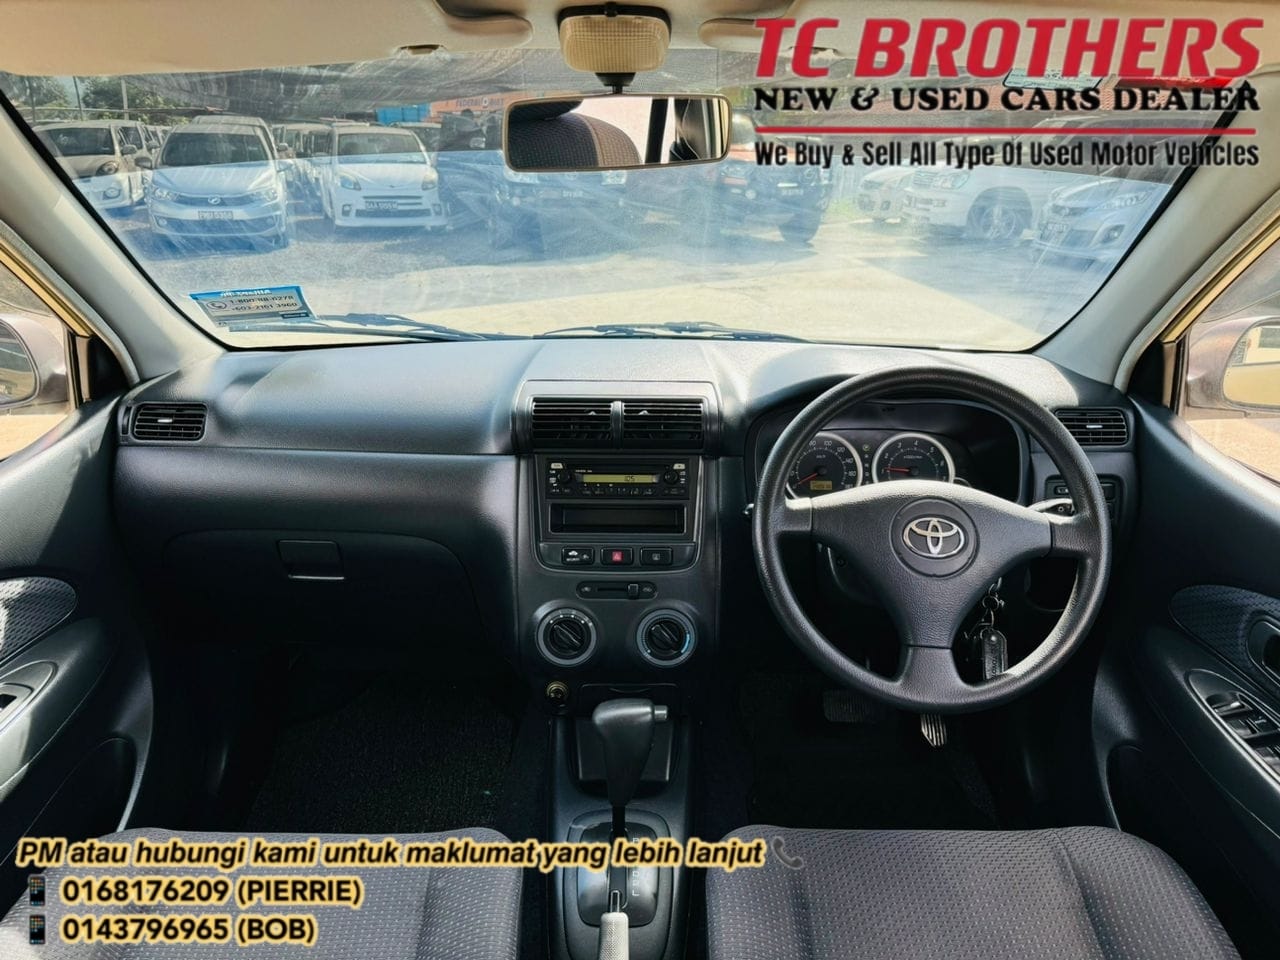 TC BROTHERS NEW & USED CARS DEALER